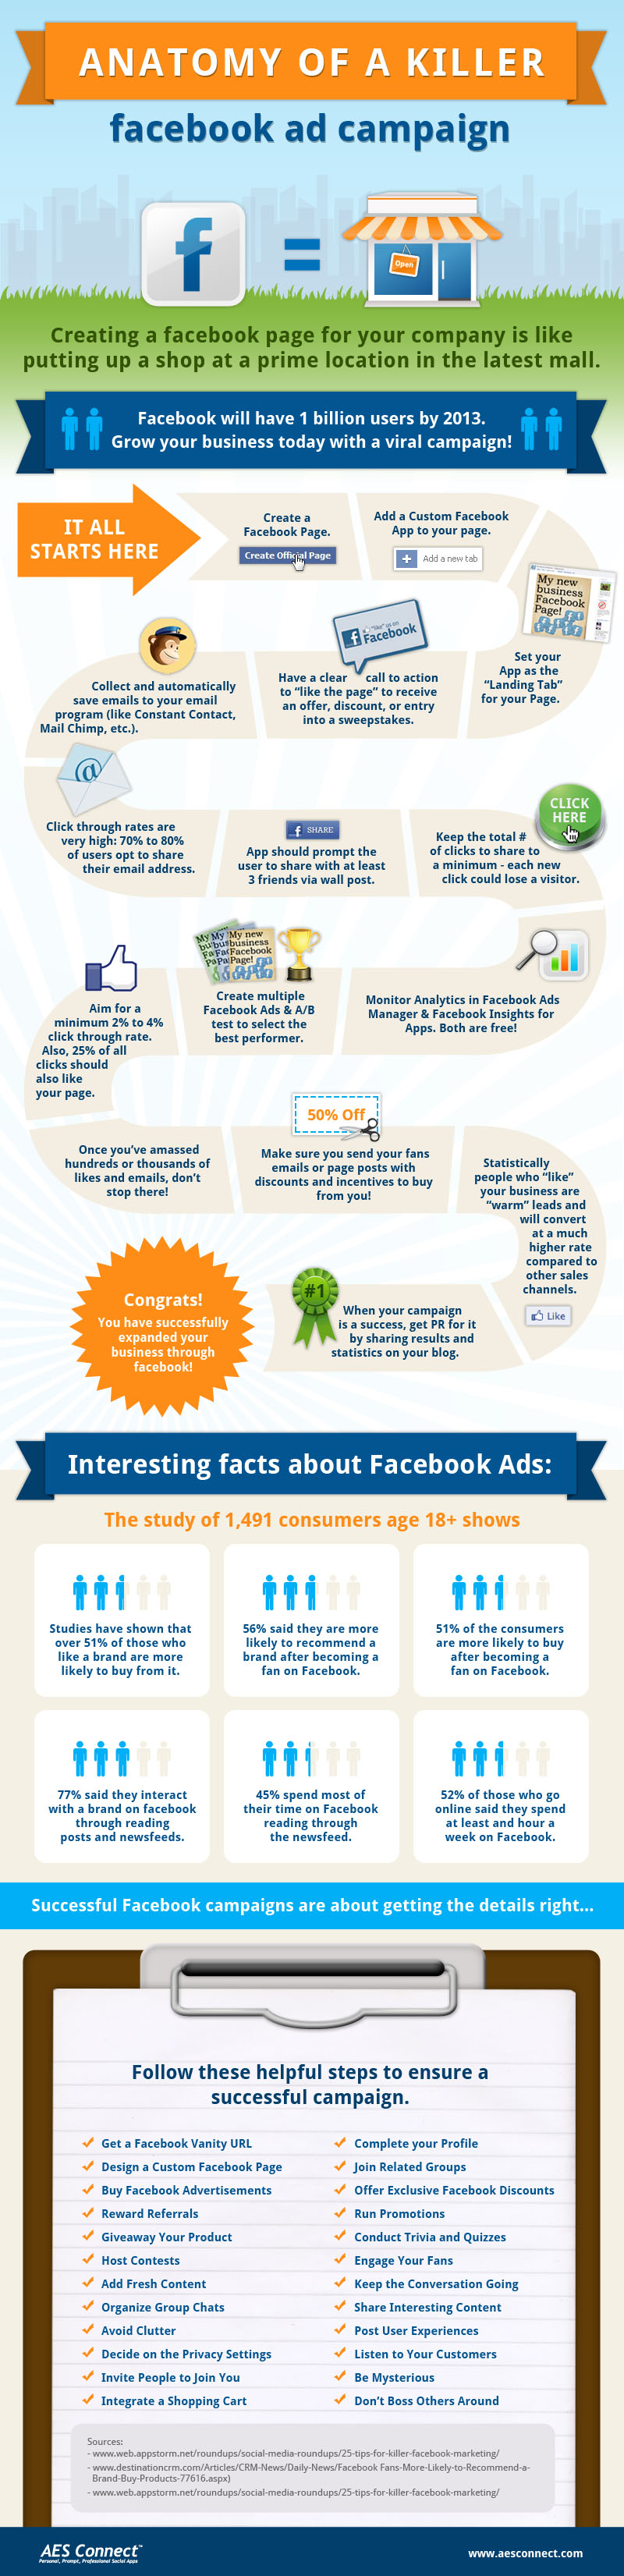 14 Tips For a Successful Facebook Advertising Campaign